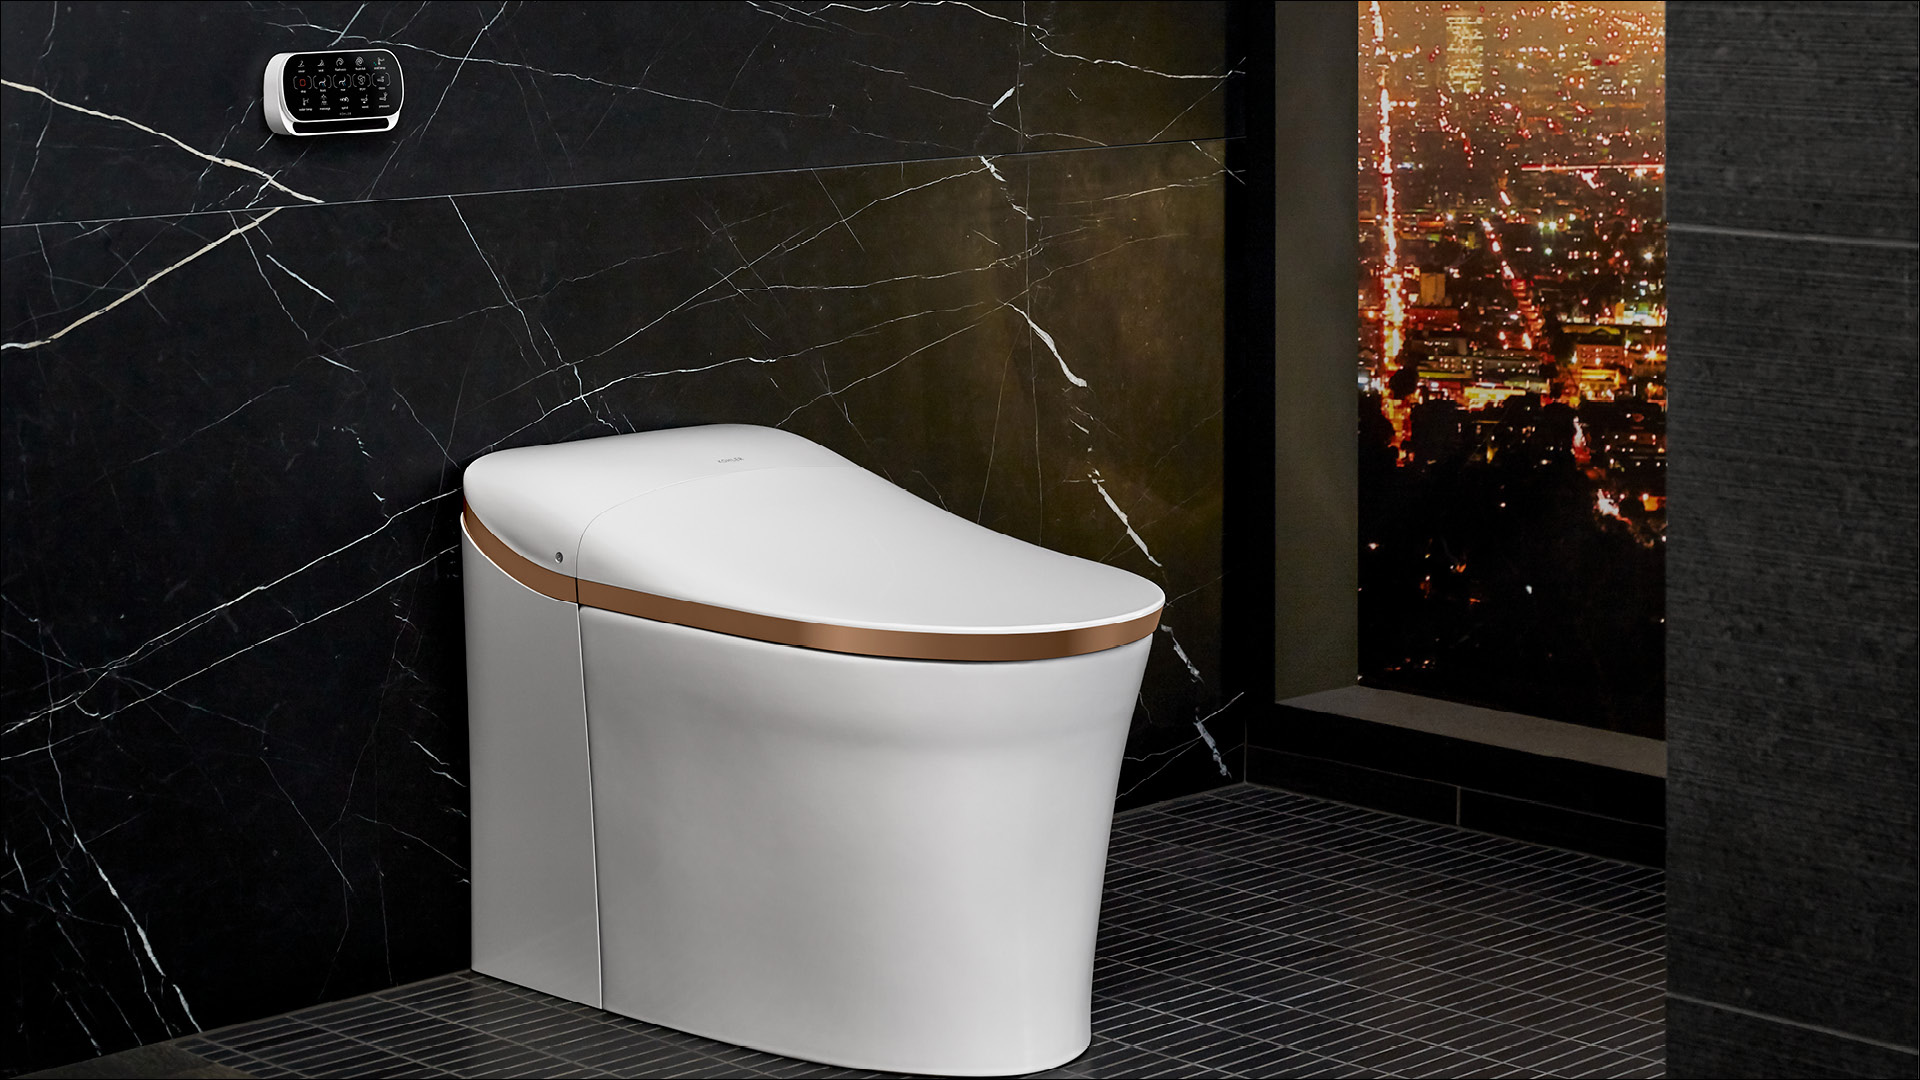 The Eir Intelligent toilet boasts a modern design softened by gentle curves and sloping profile. An optional decorative metal ring around the lid offers a unique finish accent.